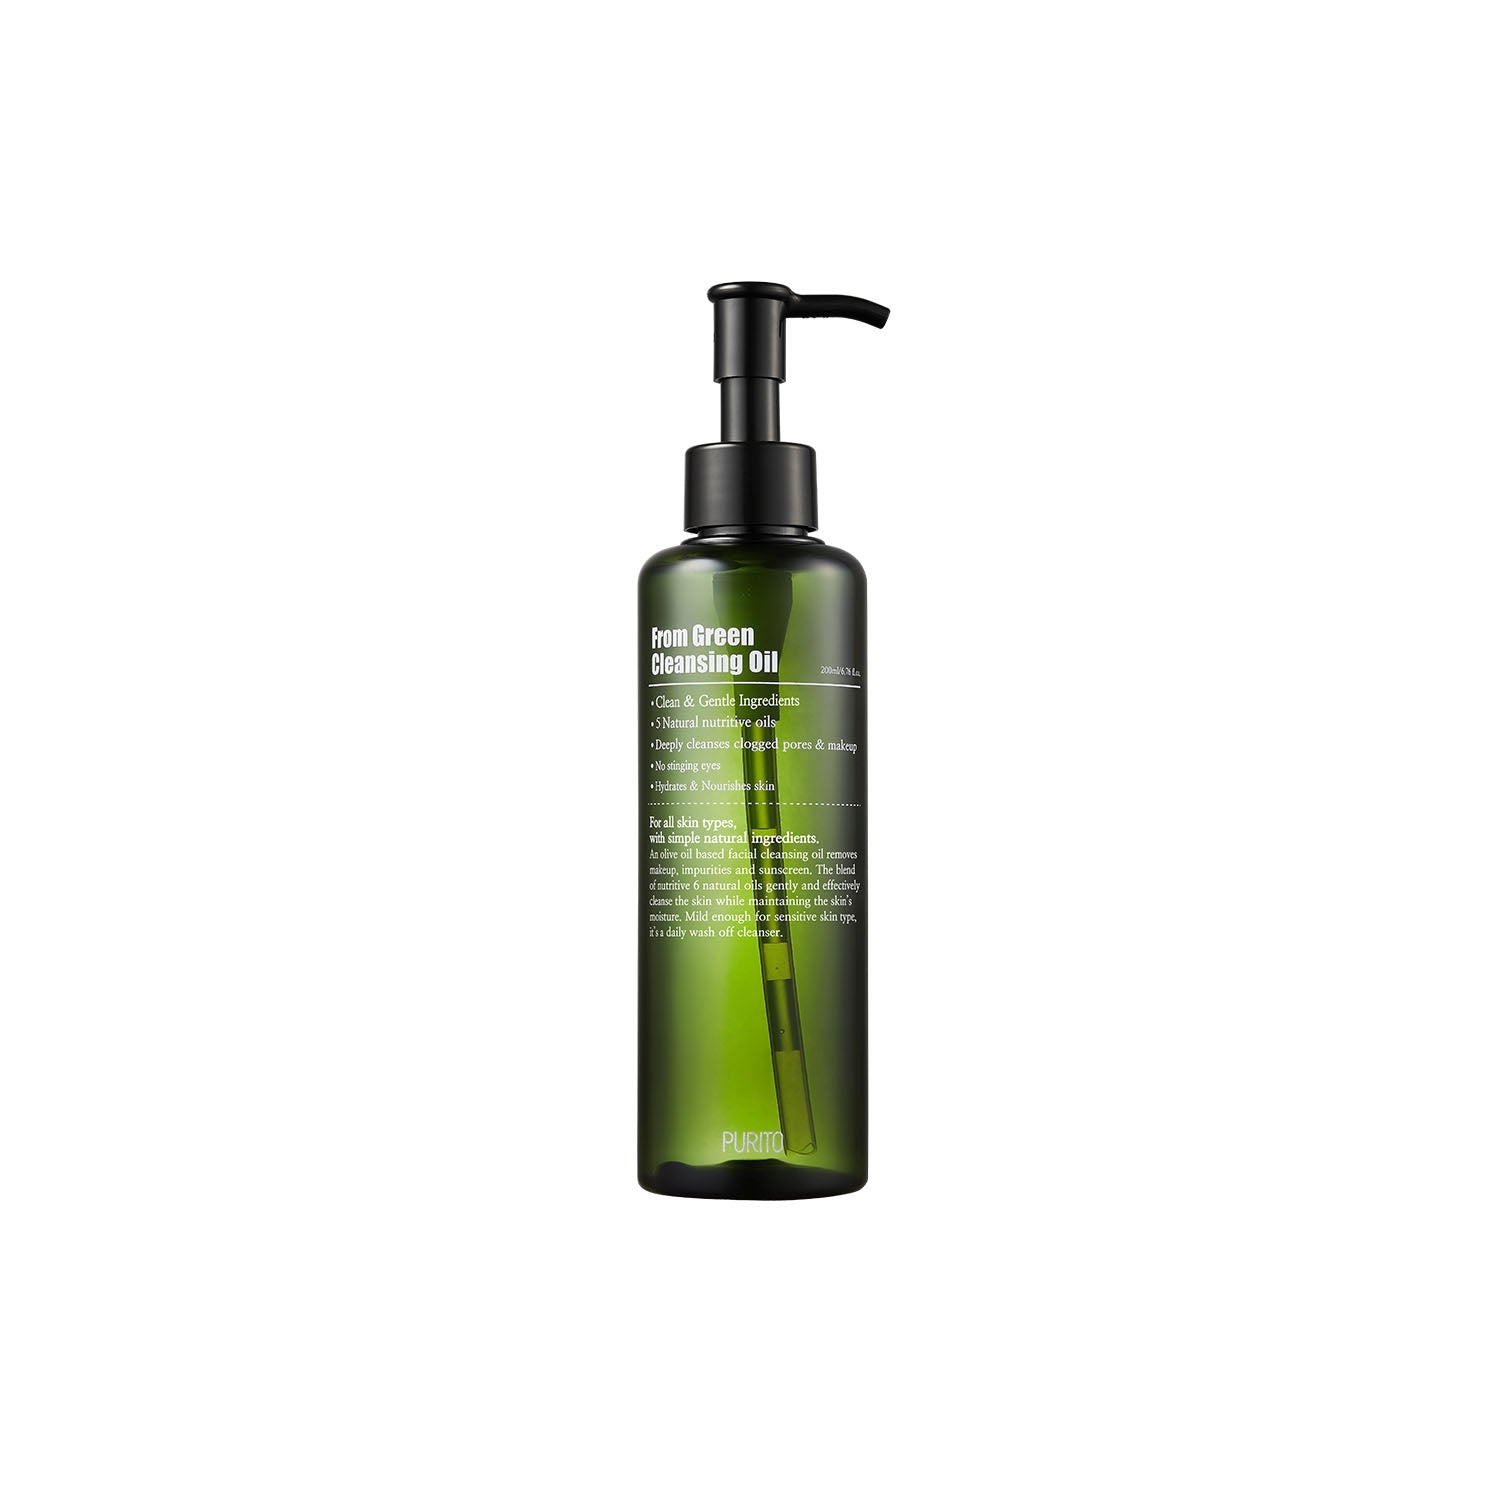 PURITO FROM GREEN CLEANSING OIL